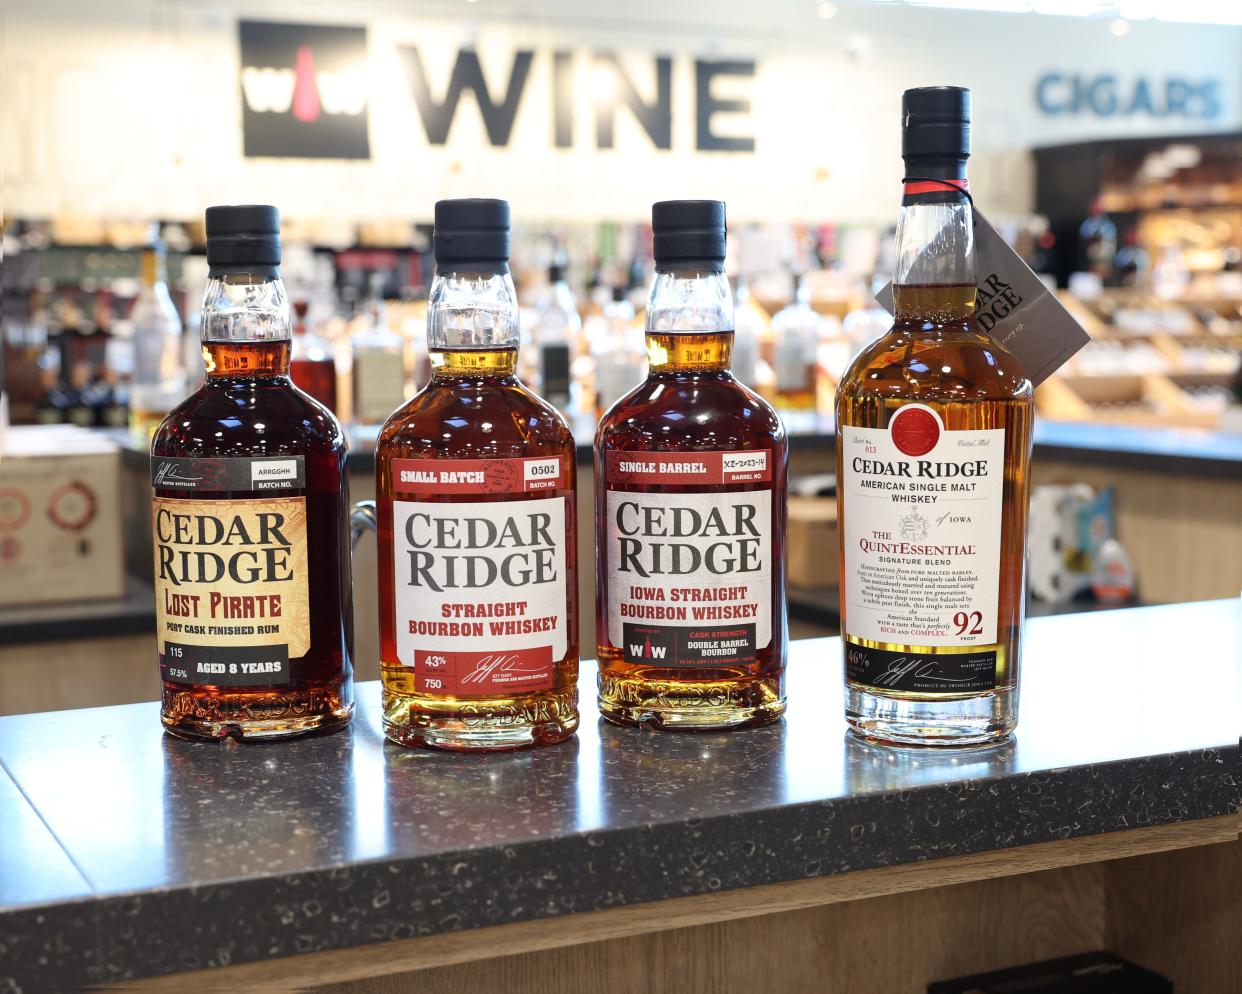 Cedar Ridge Distillery from Swisher, Iowa, was established in 2005 and sold its first spirits in 2010.